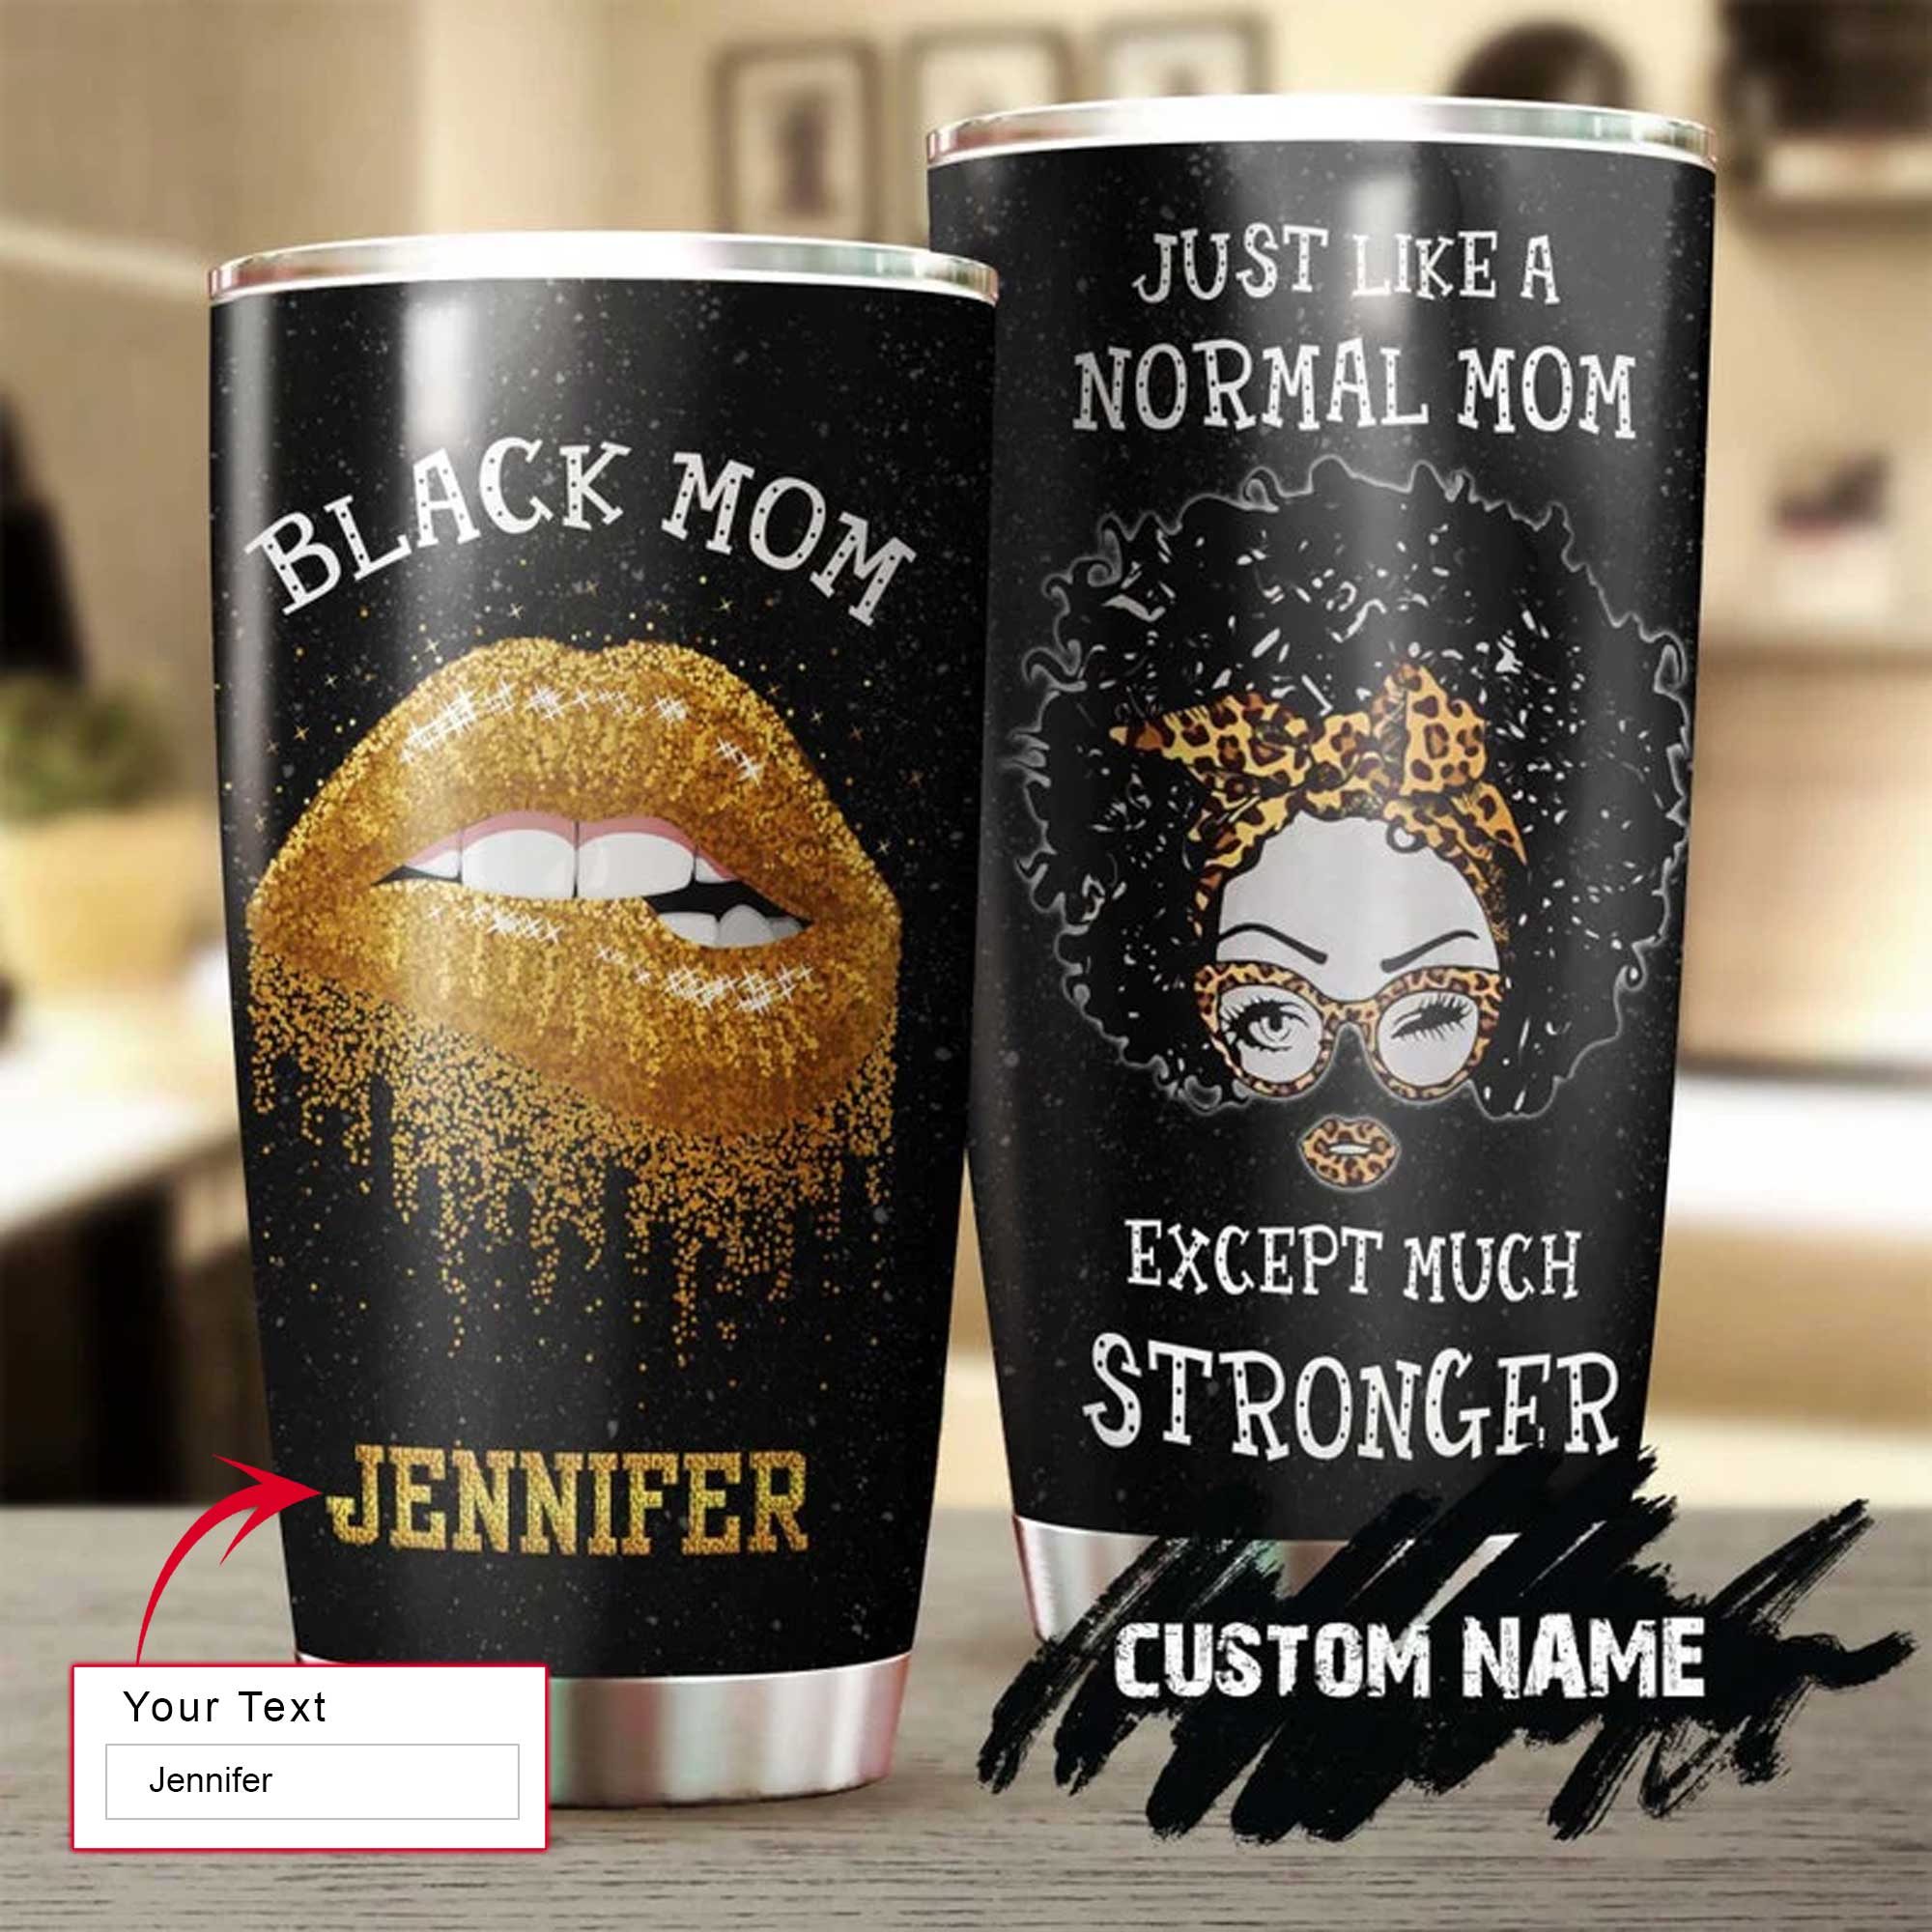 Personalized Mother's Day Gift Tumbler - Custom Gift For Mother's Day, Presents for Mom - Black Mom, Just Like Normal Mom Except Much Stronger Tumbler